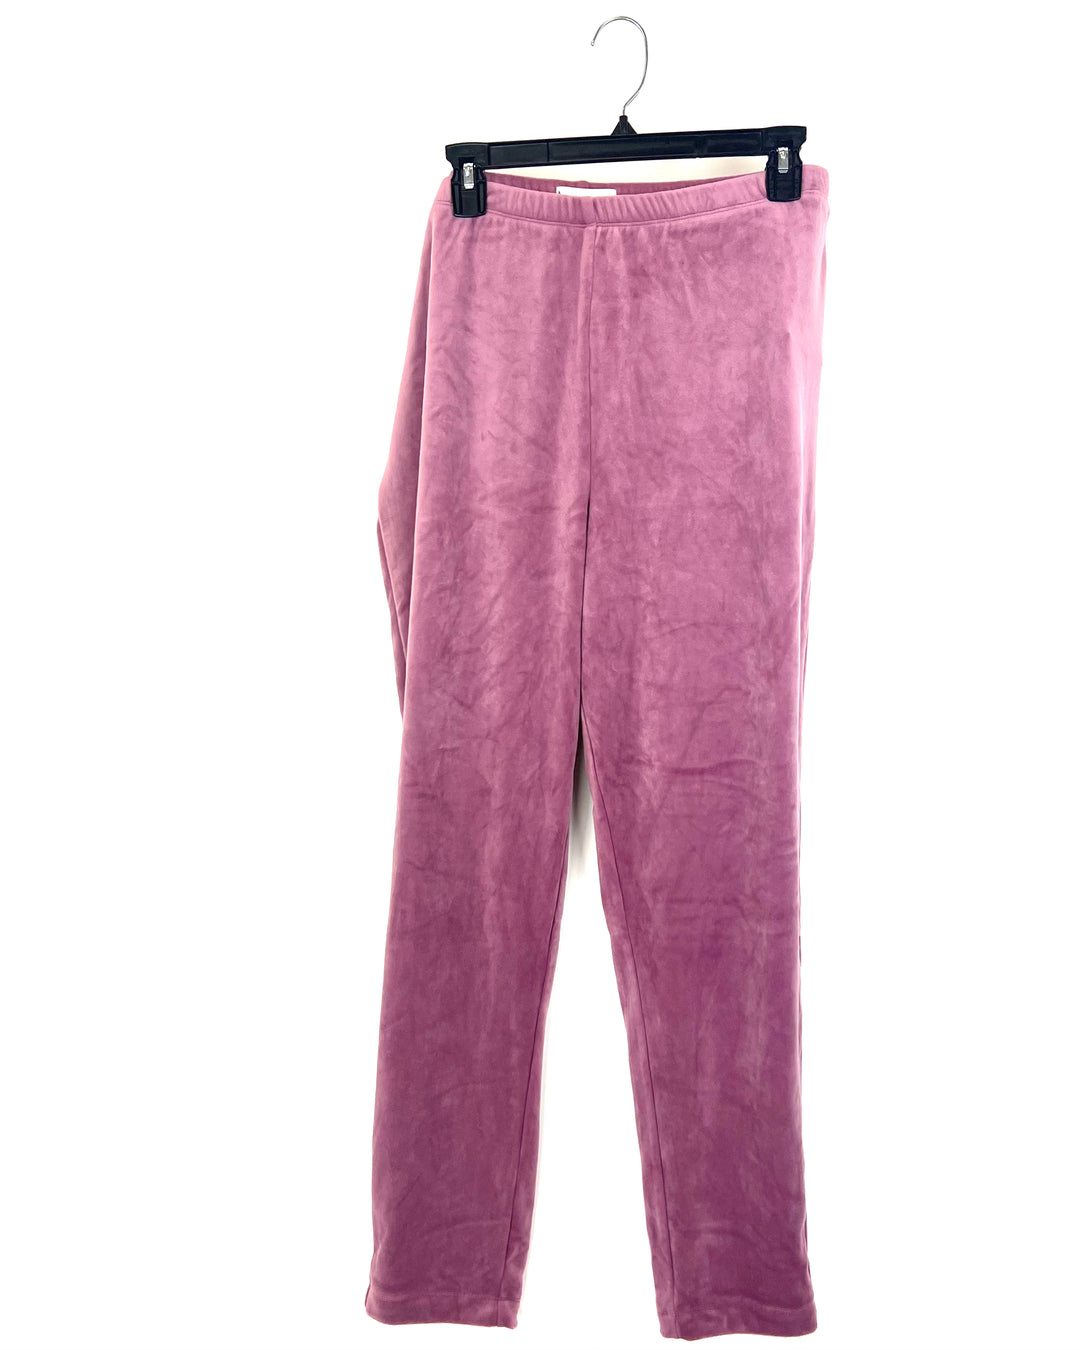 Purple Velour Pants - Small and 1X